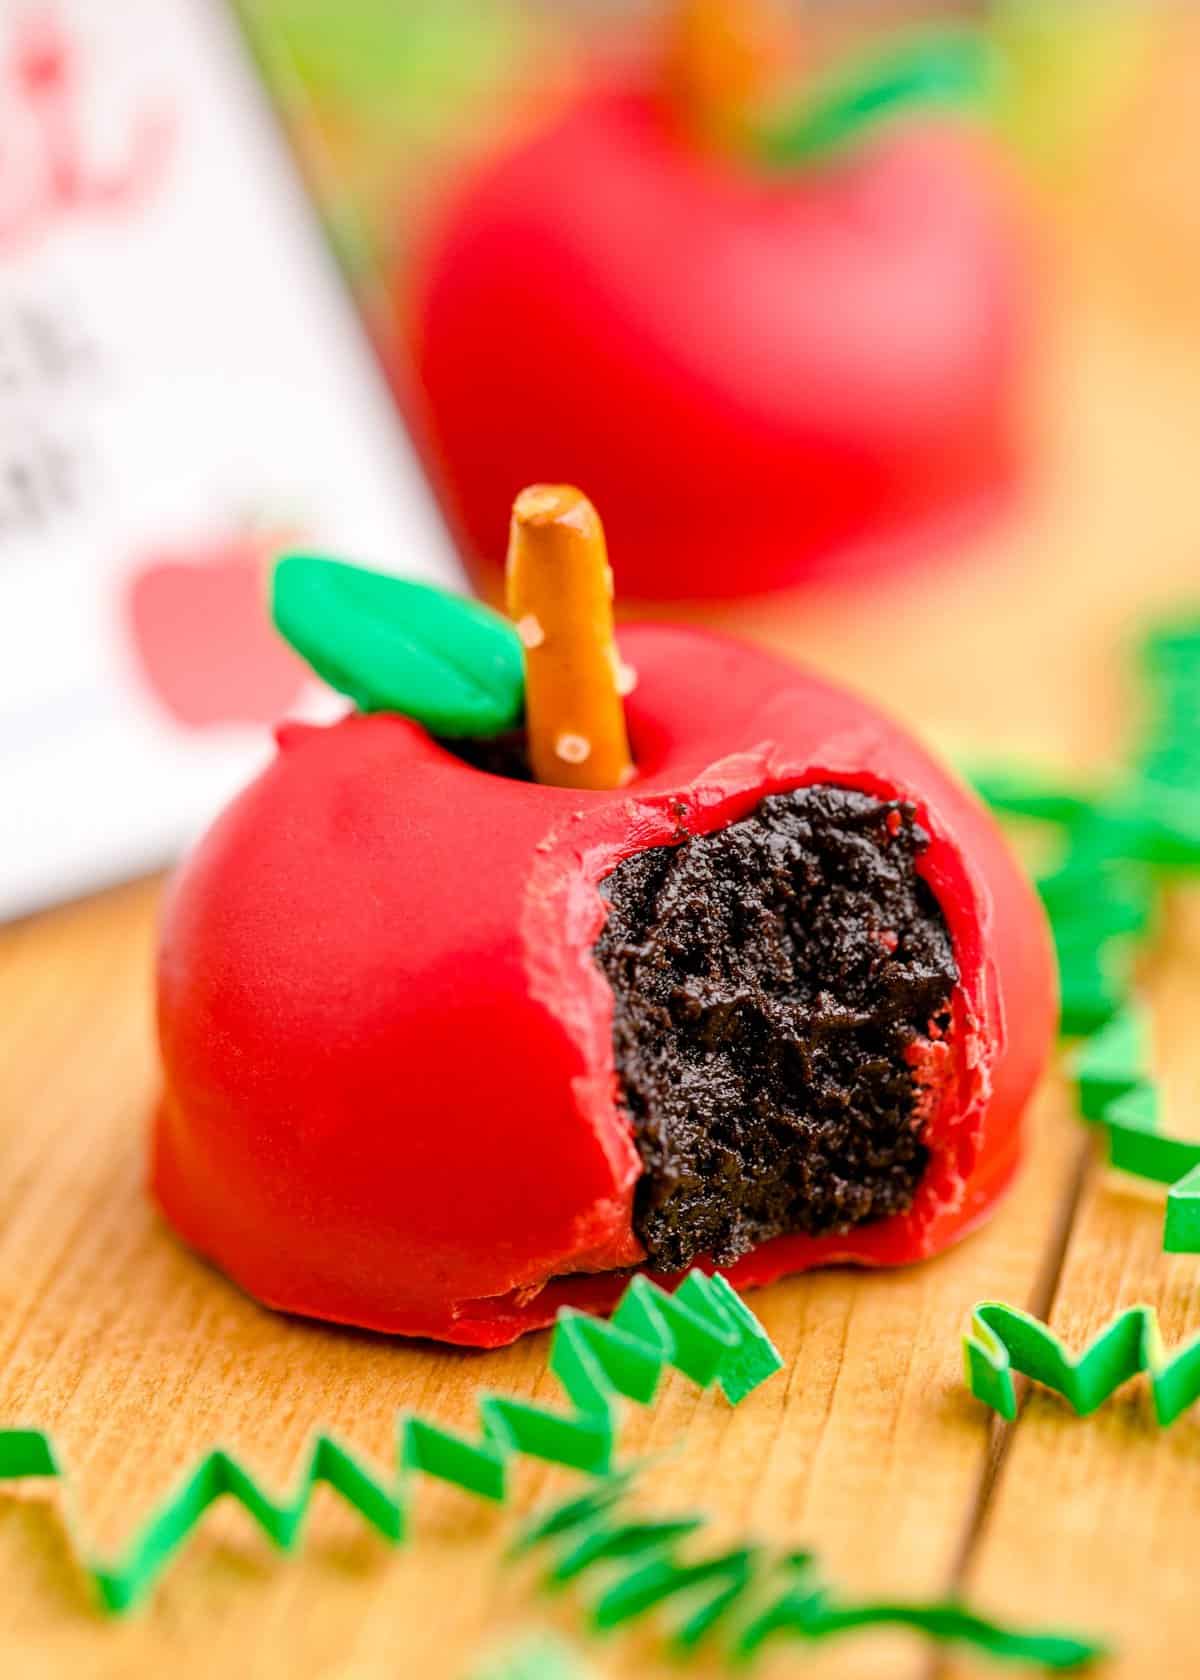 An apple oreo ball on a wood counter with a bite taken out exposing the oreo truffle center.